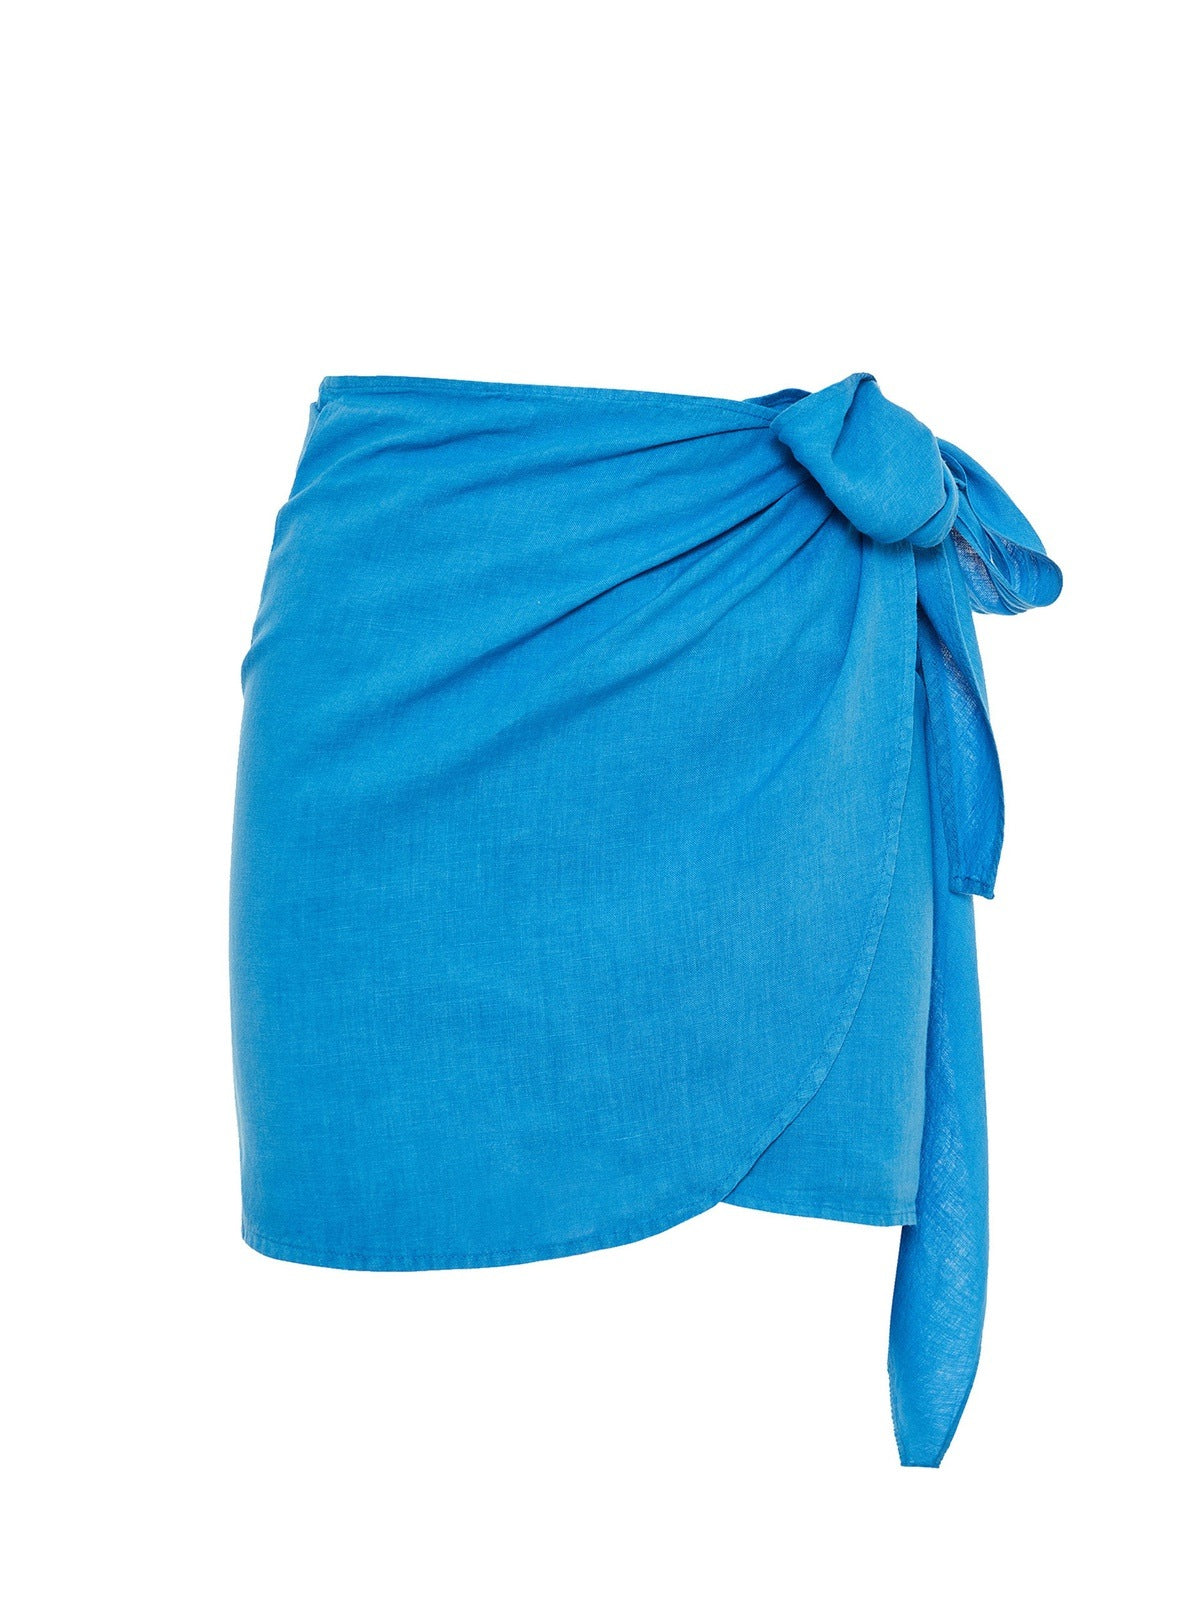 The Ruban Linen bow-tie skirt in Milos - ReLife